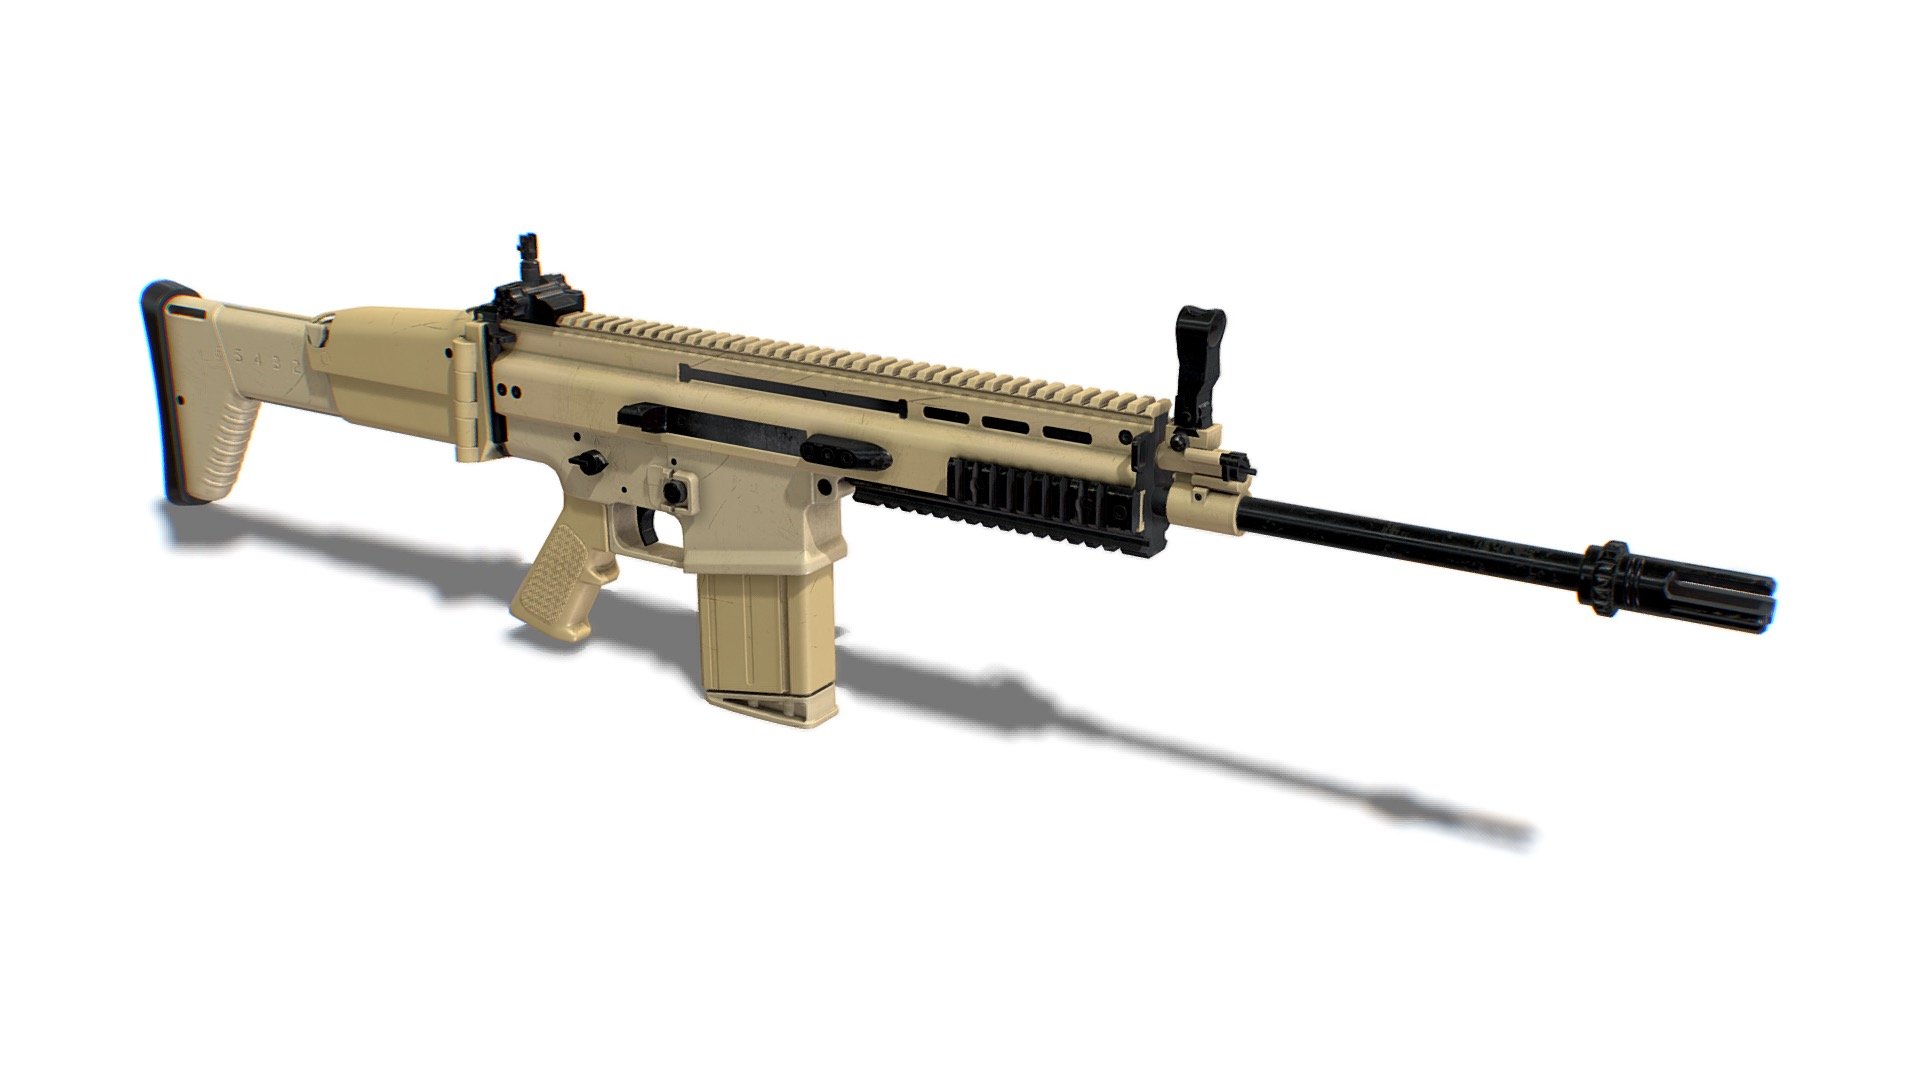 The model looks like an Assault Rifle FN SCAR-L. All parts of the model were made in full accordance with the original. Each dynamical part is separated and has correct pivot points, that allow easy animation and use in games. 

Advanced information:
- single material for whole mesh;
- set of 4K PBR textures;
- set of 4K Unreal PBR textures;
- set of 4K Unity PBR textures;
- set of 4K CryEngine PBR textures;
- FBX, DAE, ABC, OBJ and X3D file formats;
- 4 level of details;

Mesh details:
LOD0 - 10933
LOD1 - 5466
LOD2 - 2732
LOD3 - 300 - Assault Rifle SCAR-L - 3D model by FreakGames 3d model